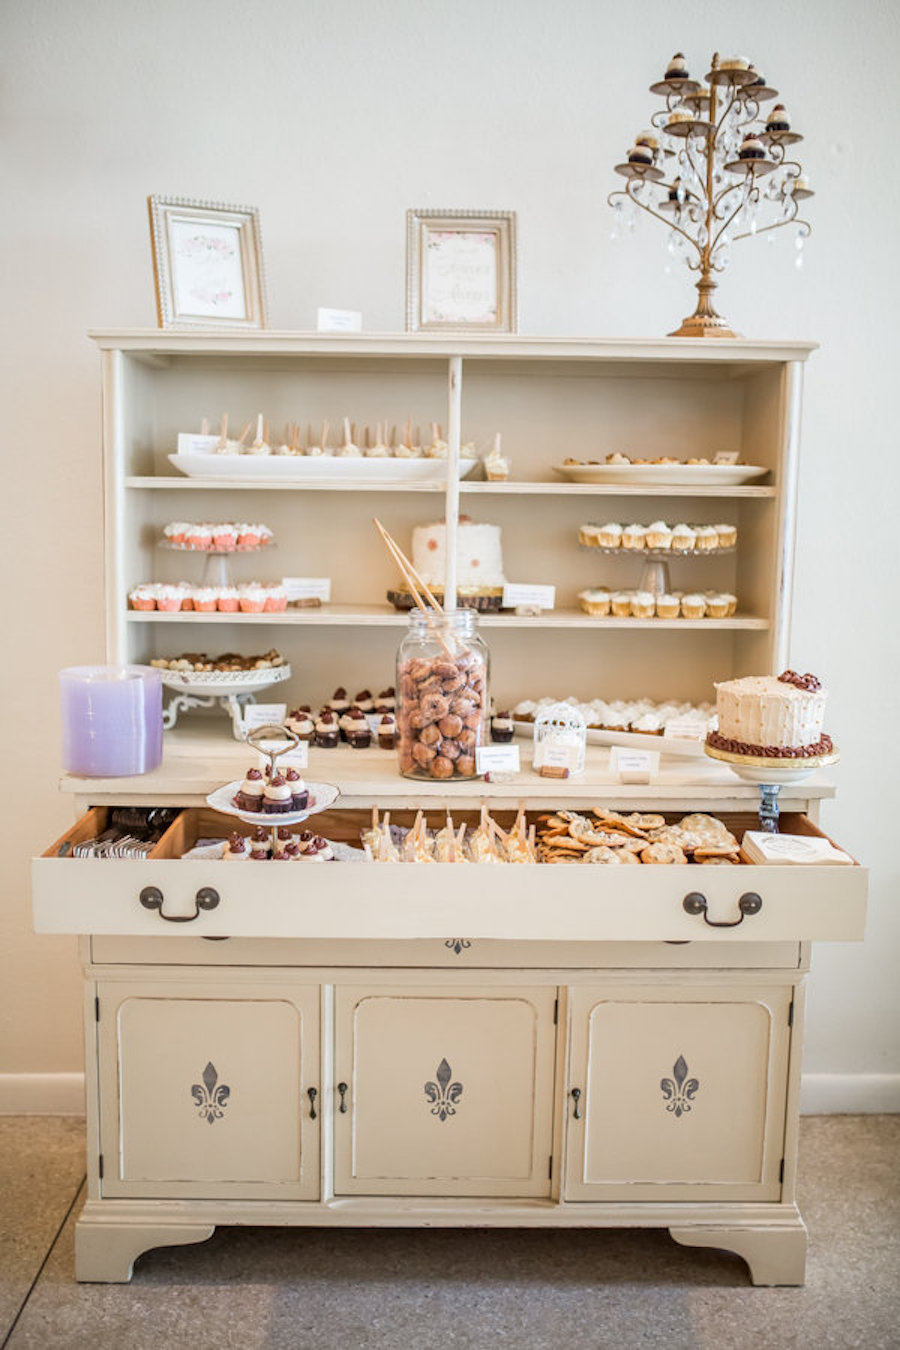 Vintage Wooden Chest Dessert Table With Cupcakes, Cookies, Cake, and Sweets